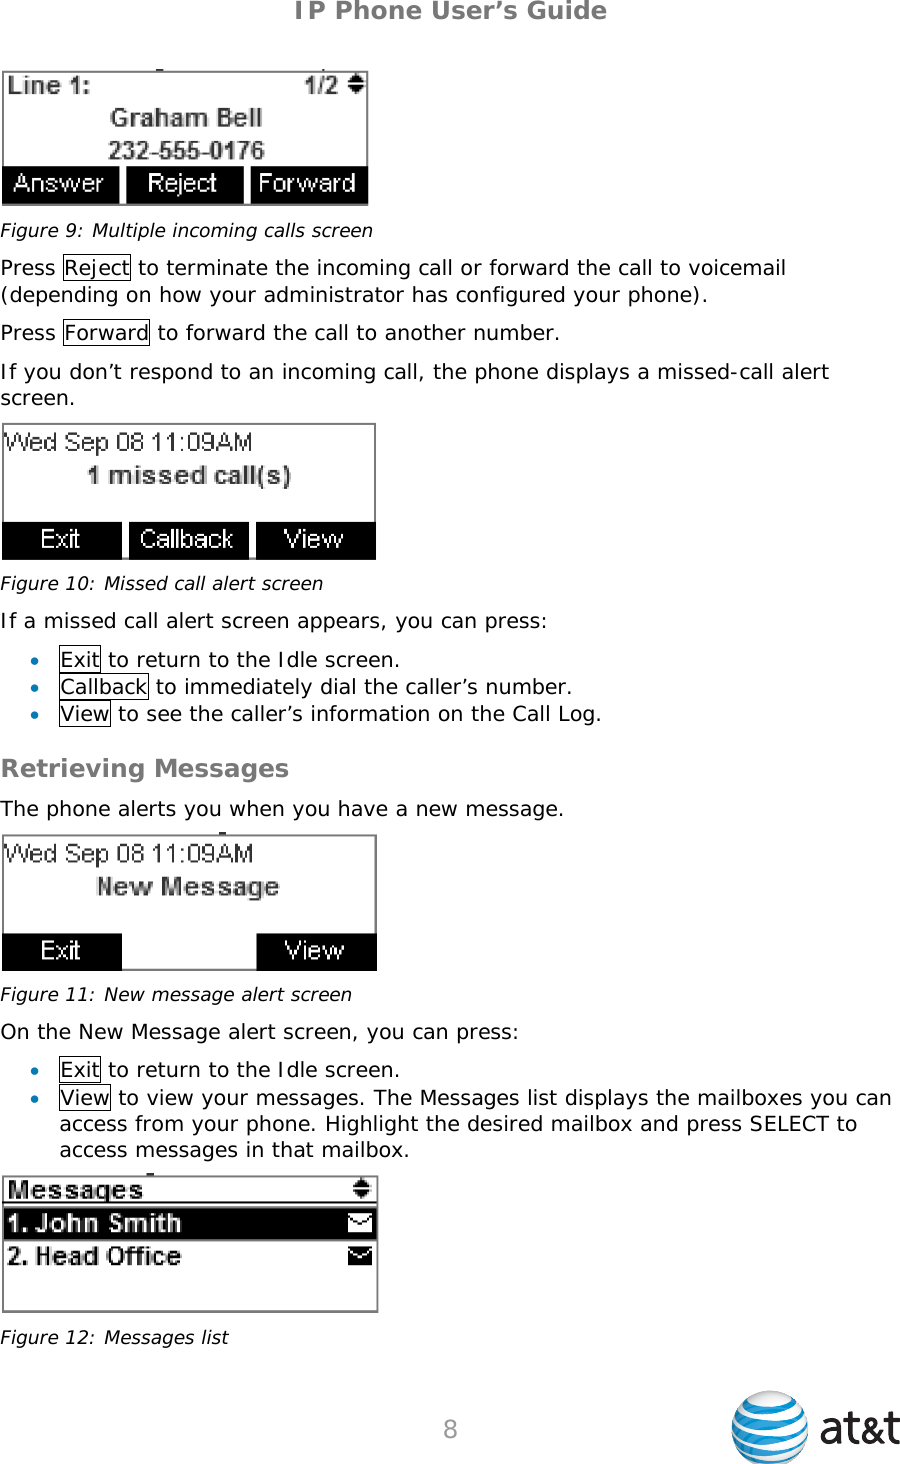 IP Phone User’s Guide  Figure 9: Multiple incoming calls screen Press Reject to terminate the incoming call or forward the call to voicemail (depending on how your administrator has configured your phone). Press Forward to forward the call to another number. If you don’t respond to an incoming call, the phone displays a missed-call alert screen.  Figure 10: Missed call alert screen If a missed call alert screen appears, you can press:  Exit to return to the Idle screen.  Callback to immediately dial the caller’s number.  View to see the caller’s information on the Call Log. Retrieving Messages The phone alerts you when you have a new message.  Figure 11: New message alert screen On the New Message alert screen, you can press:  Exit to return to the Idle screen.  View to view your messages. The Messages list displays the mailboxes you can access from your phone. Highlight the desired mailbox and press SELECT to access messages in that mailbox.  Figure 12: Messages list  8   